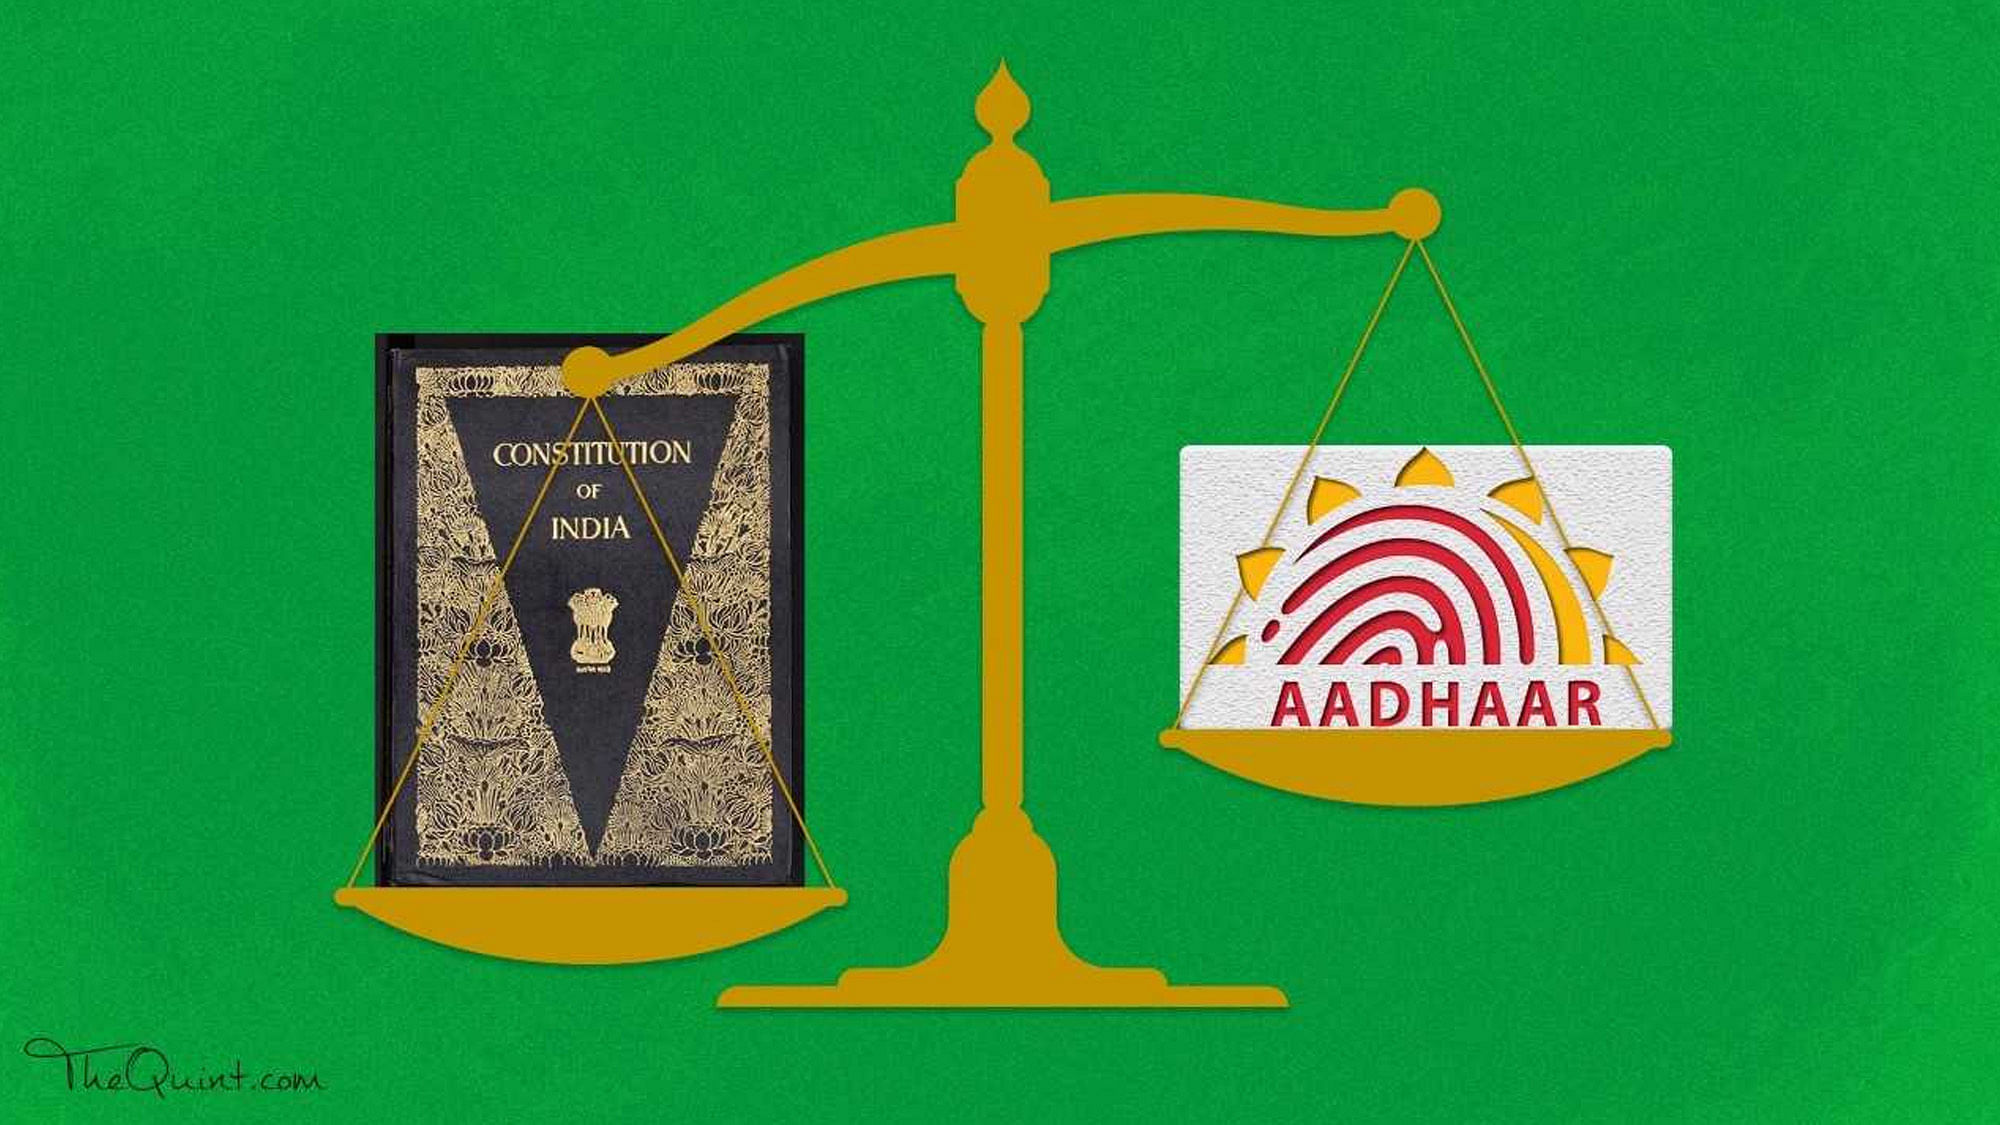 Arguments continued on day 7 of the Aadhaar hearing in the Supreme Court.